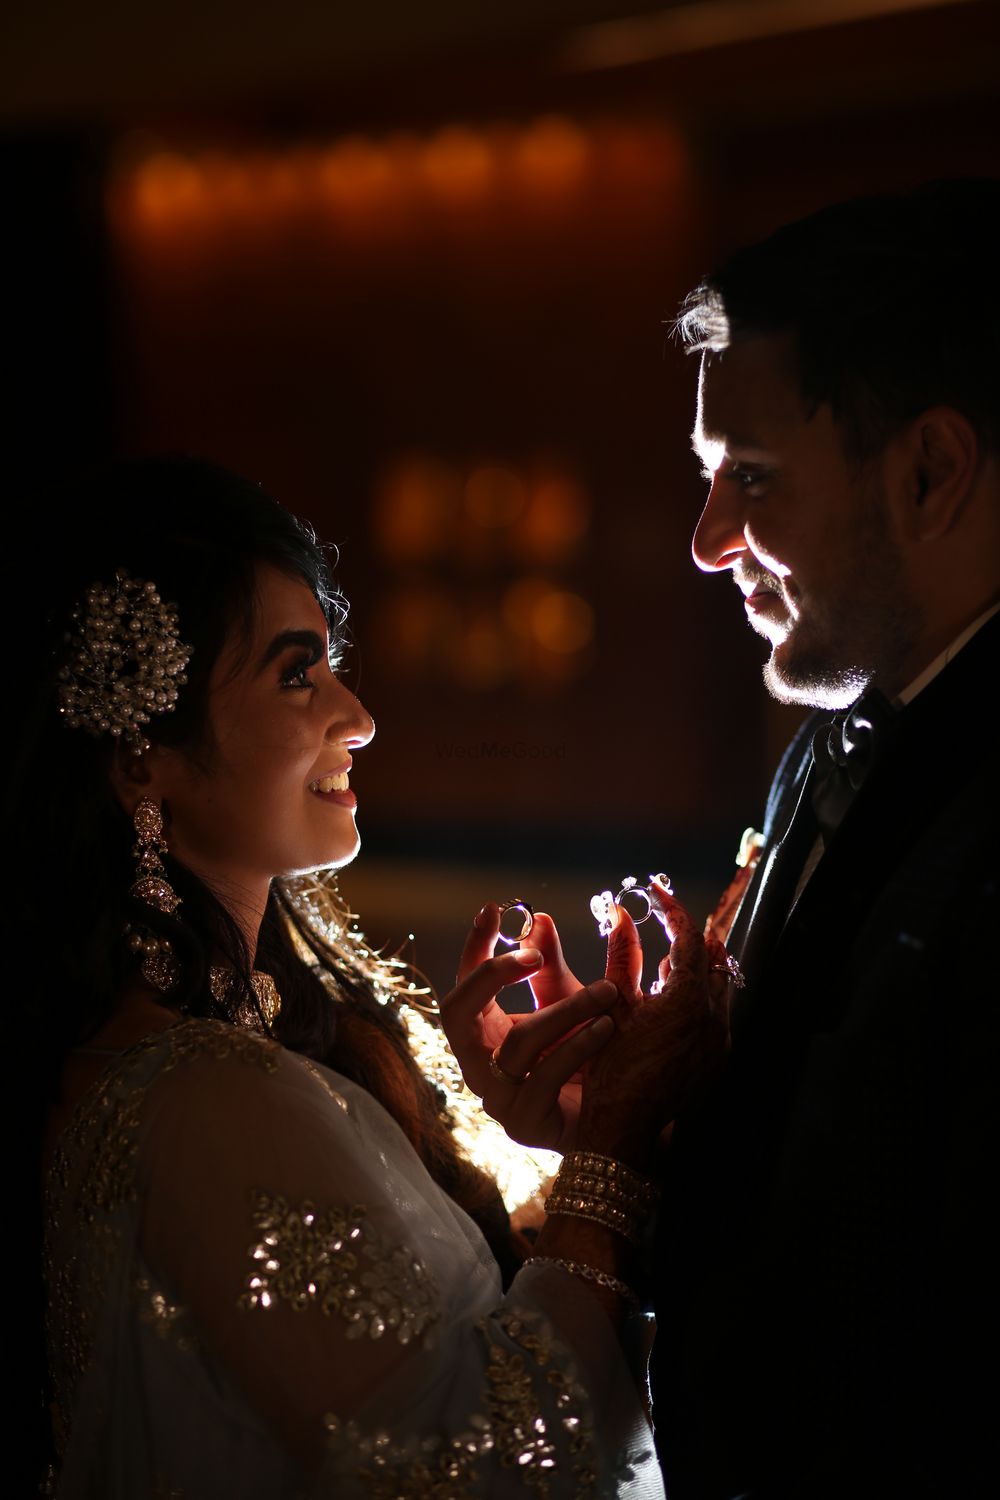 Photo From Soumya’s Engagement Soft Glam look - By Soumya Verma Makeup